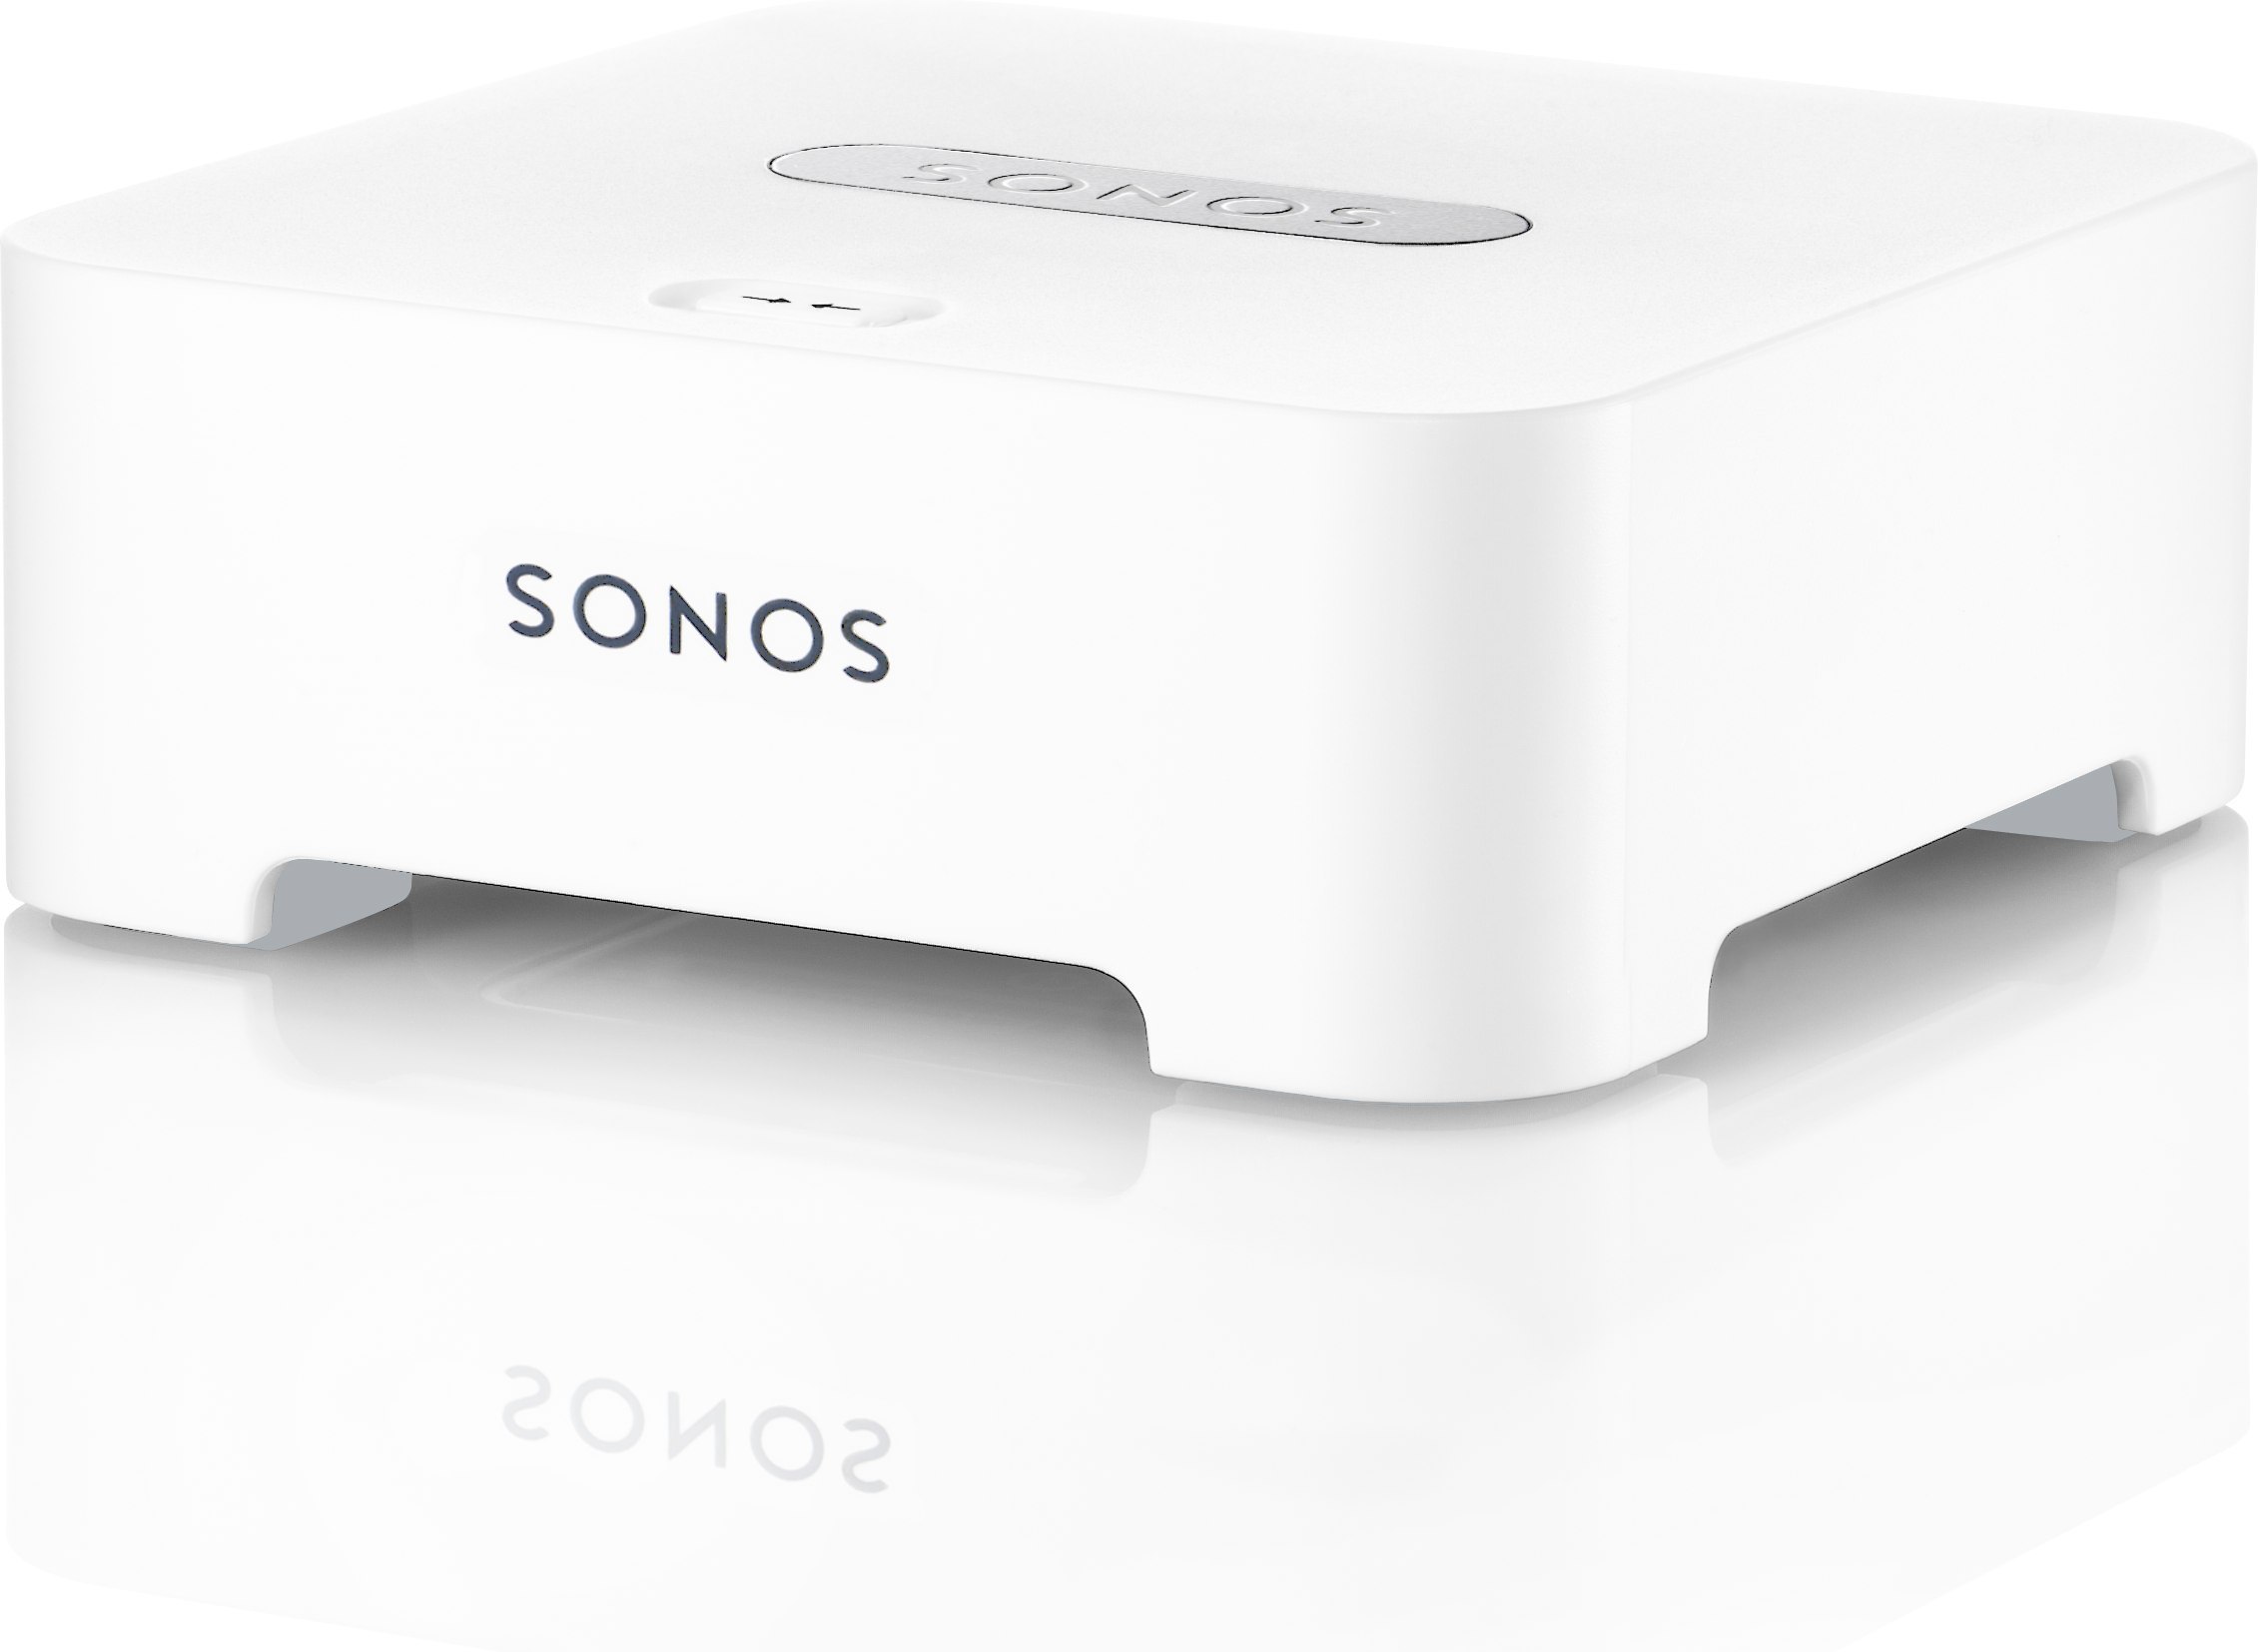 varsel liv hit Customer Reviews: Sonos® BRIDGE Connect to your router for easy wireless  operation with your Sonos system at Crutchfield